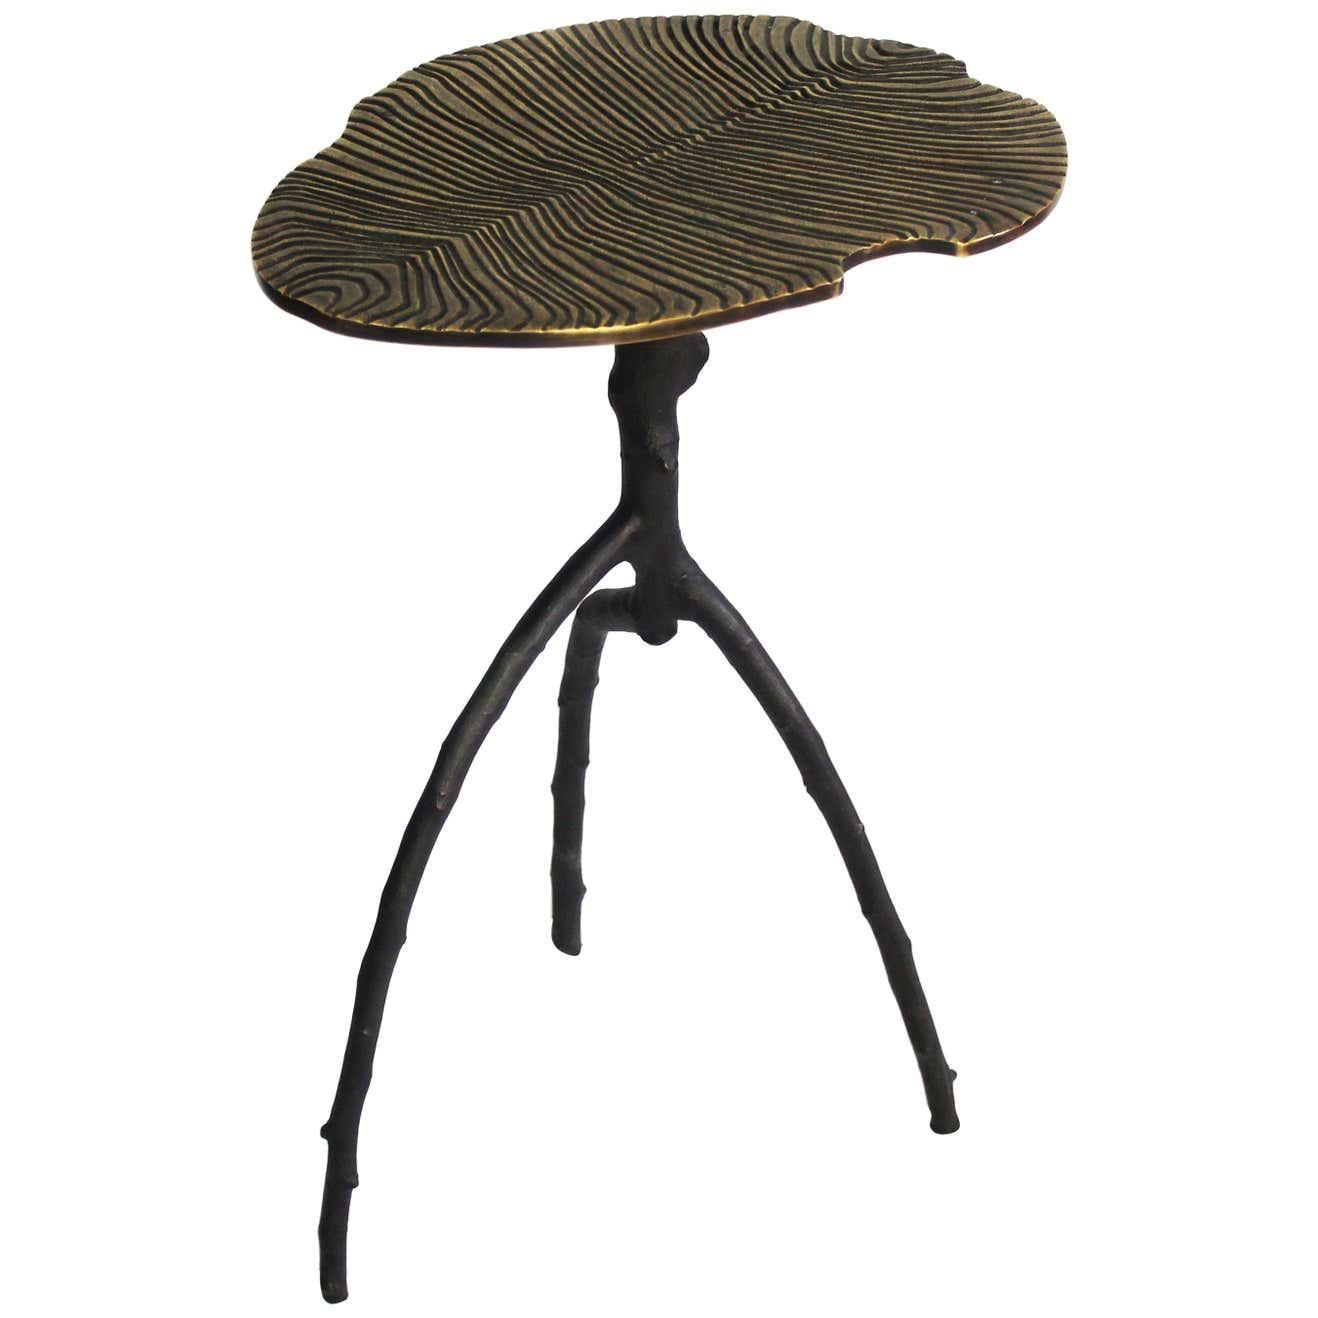 Small fossil side table by Plumbum 
Signed by Eric Gizard and Plumbum
Dimensions: 13.58